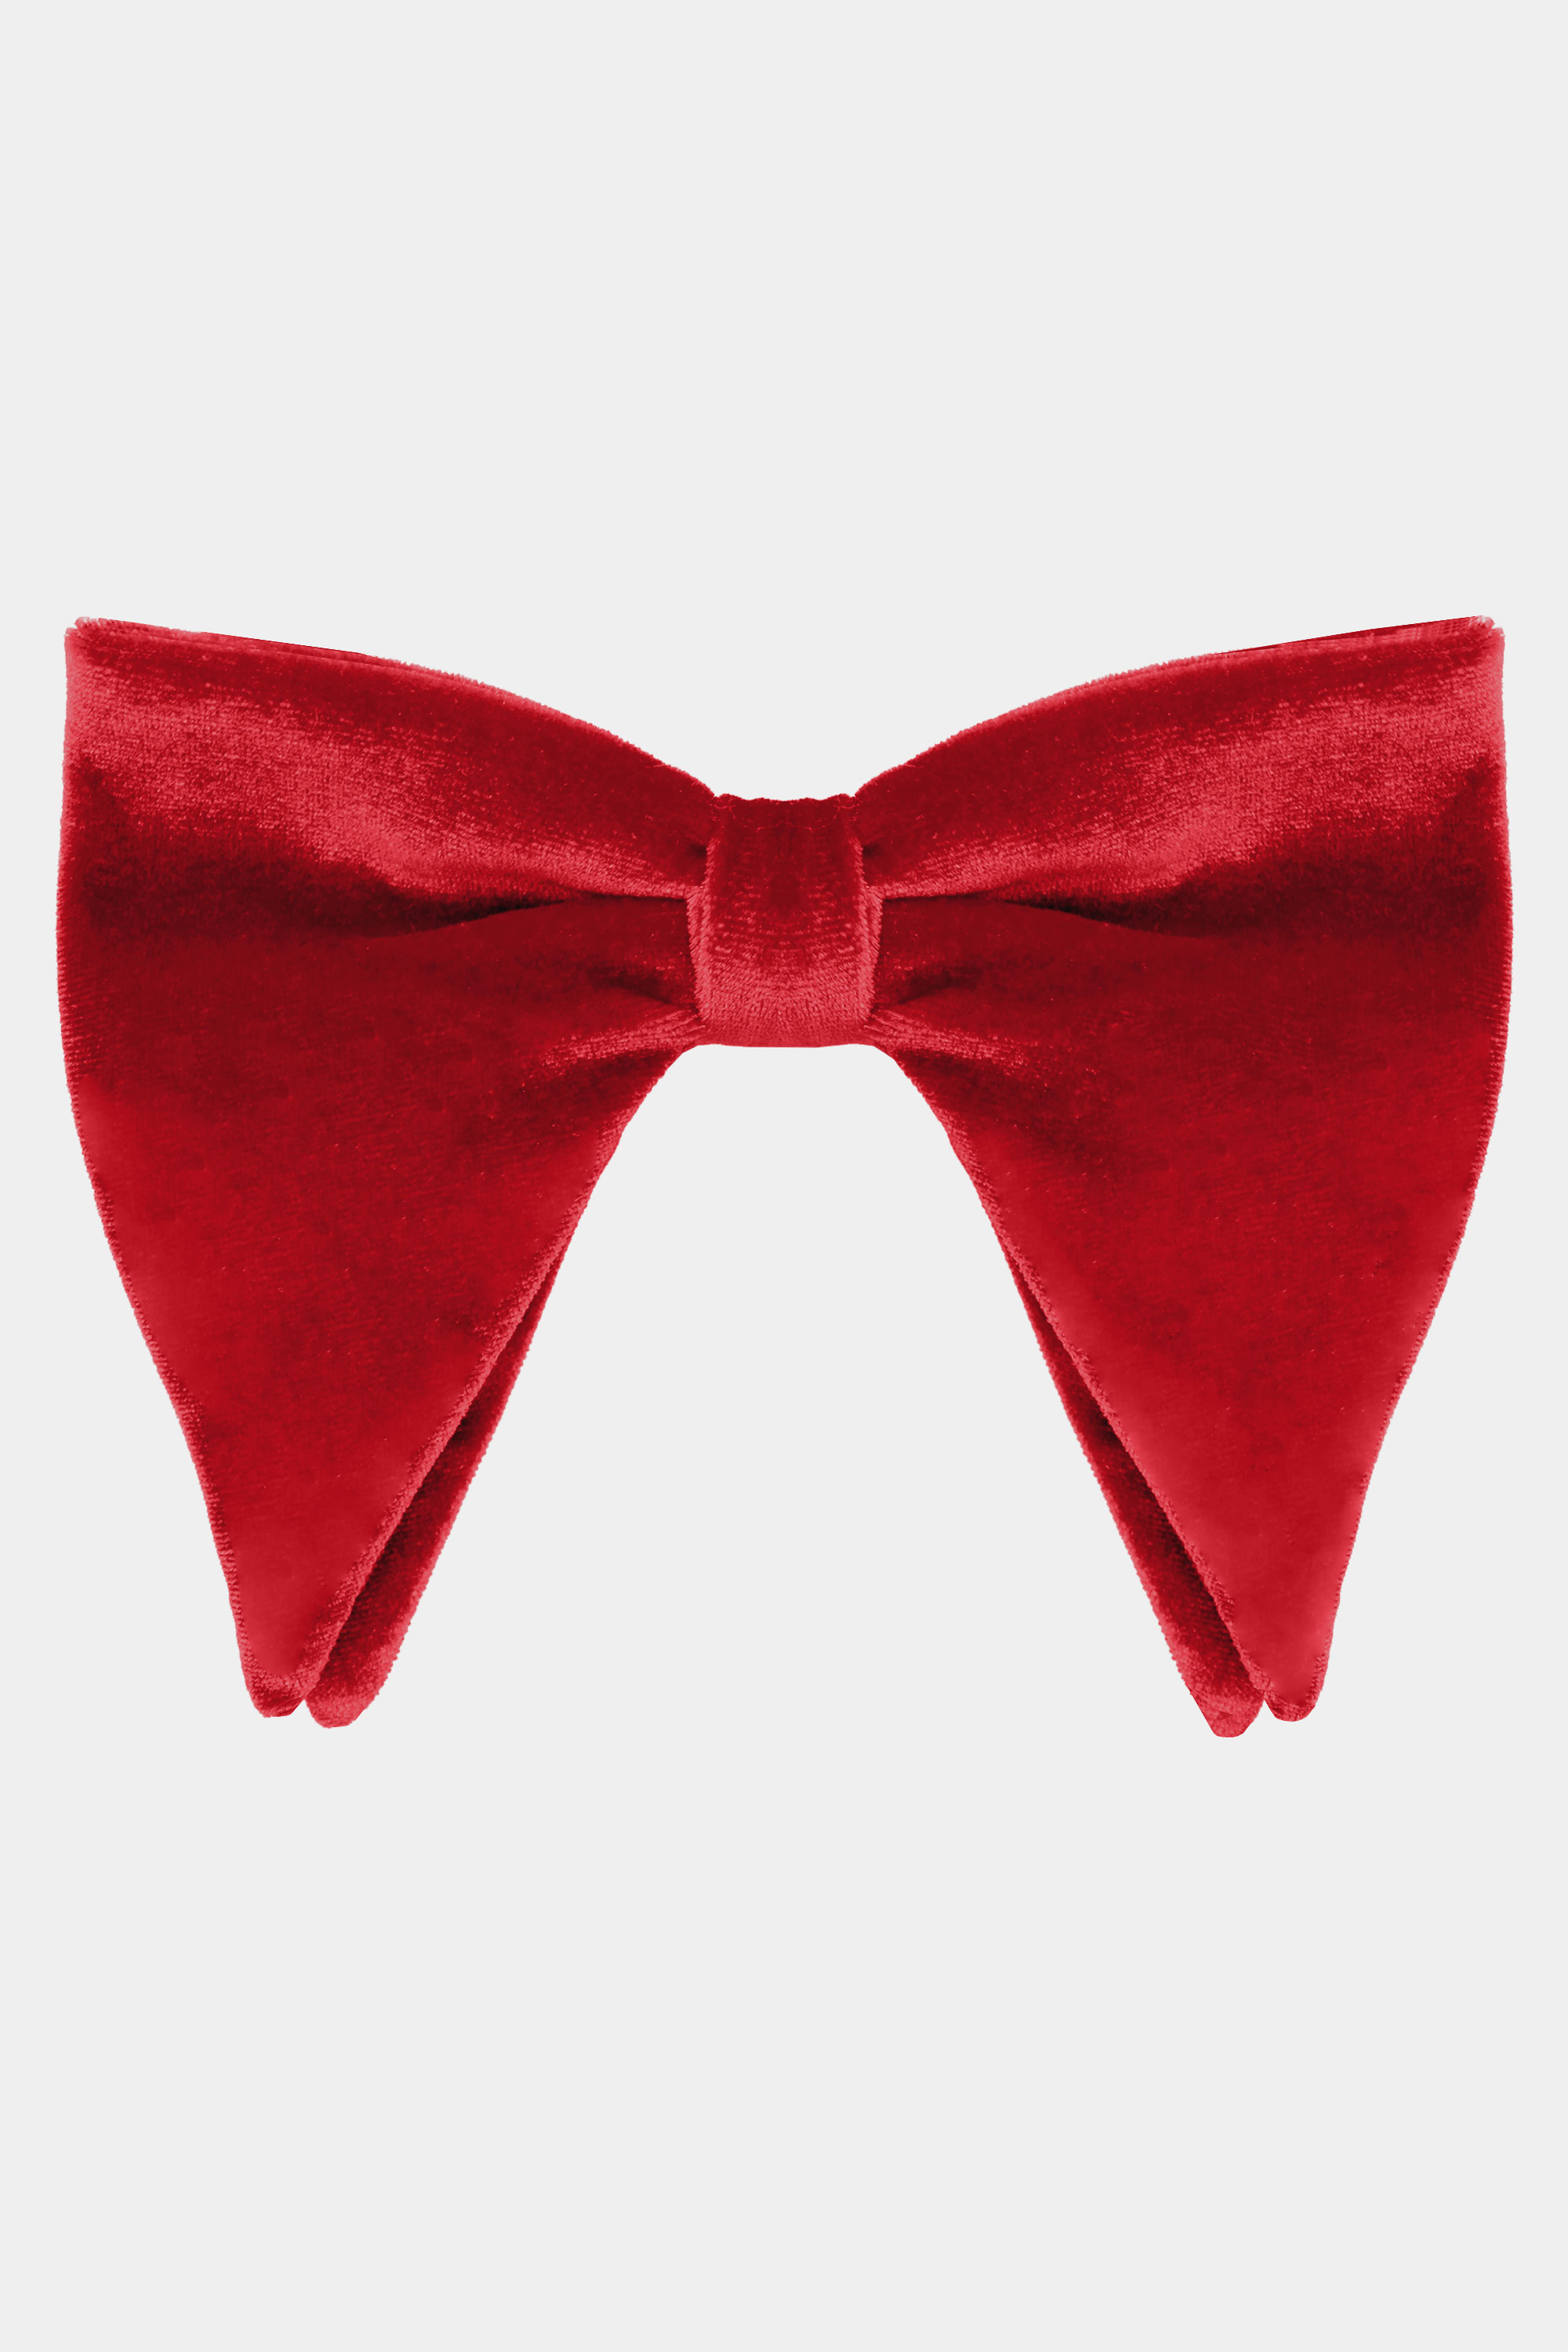 Oversized Red Bow Tie